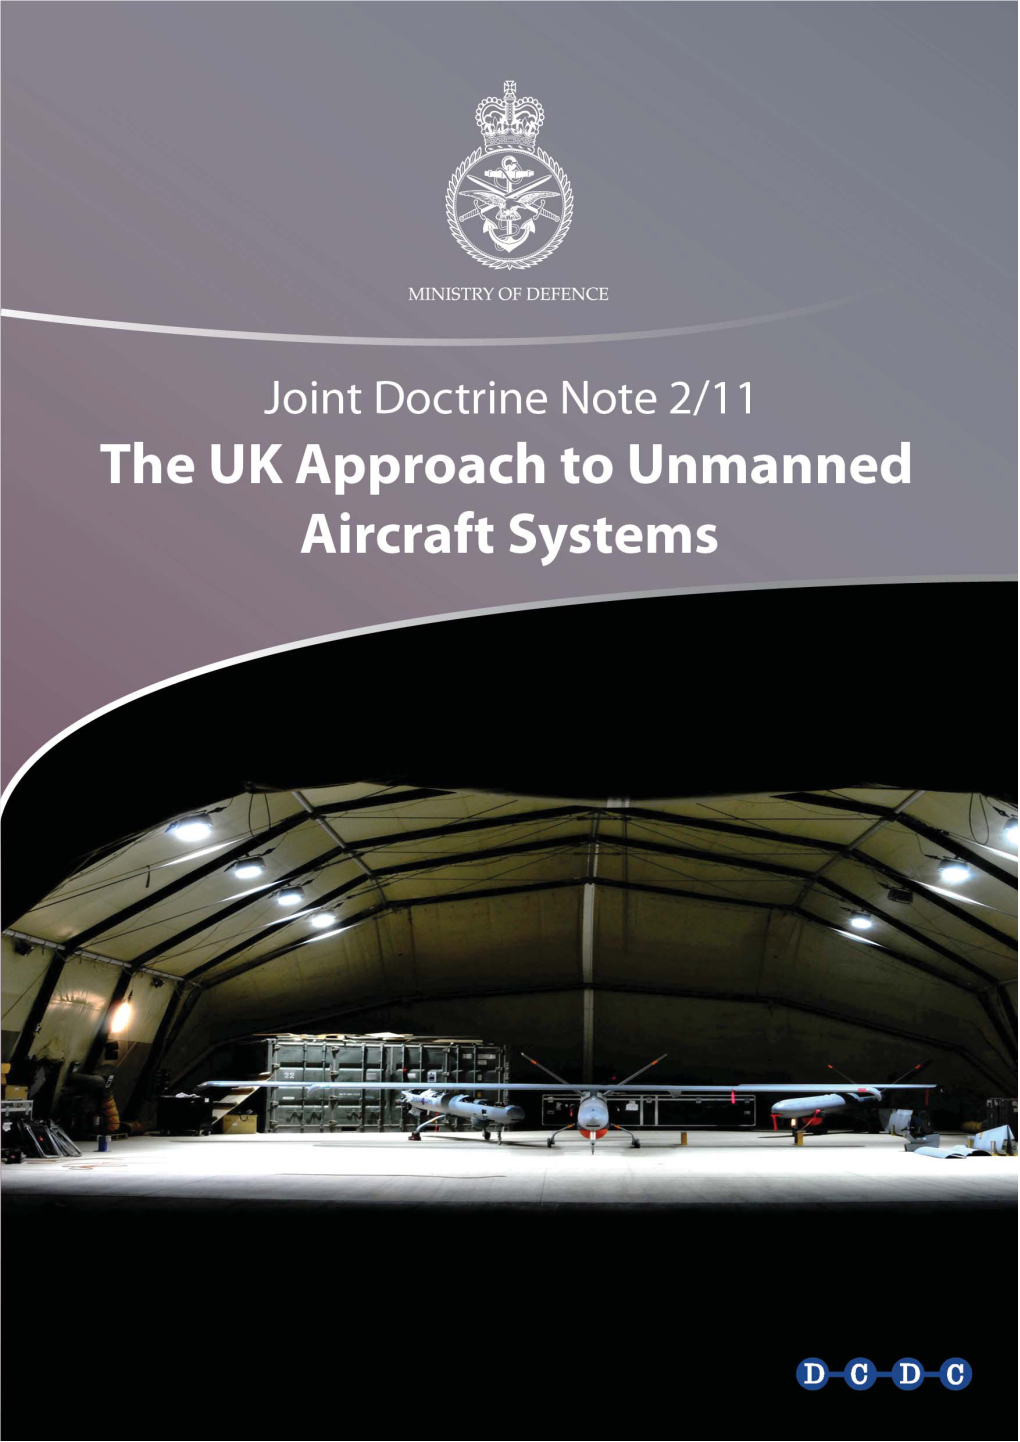 Joint Doctrine Note 2/11The UK Approach to Unmanned Aircraft Systems